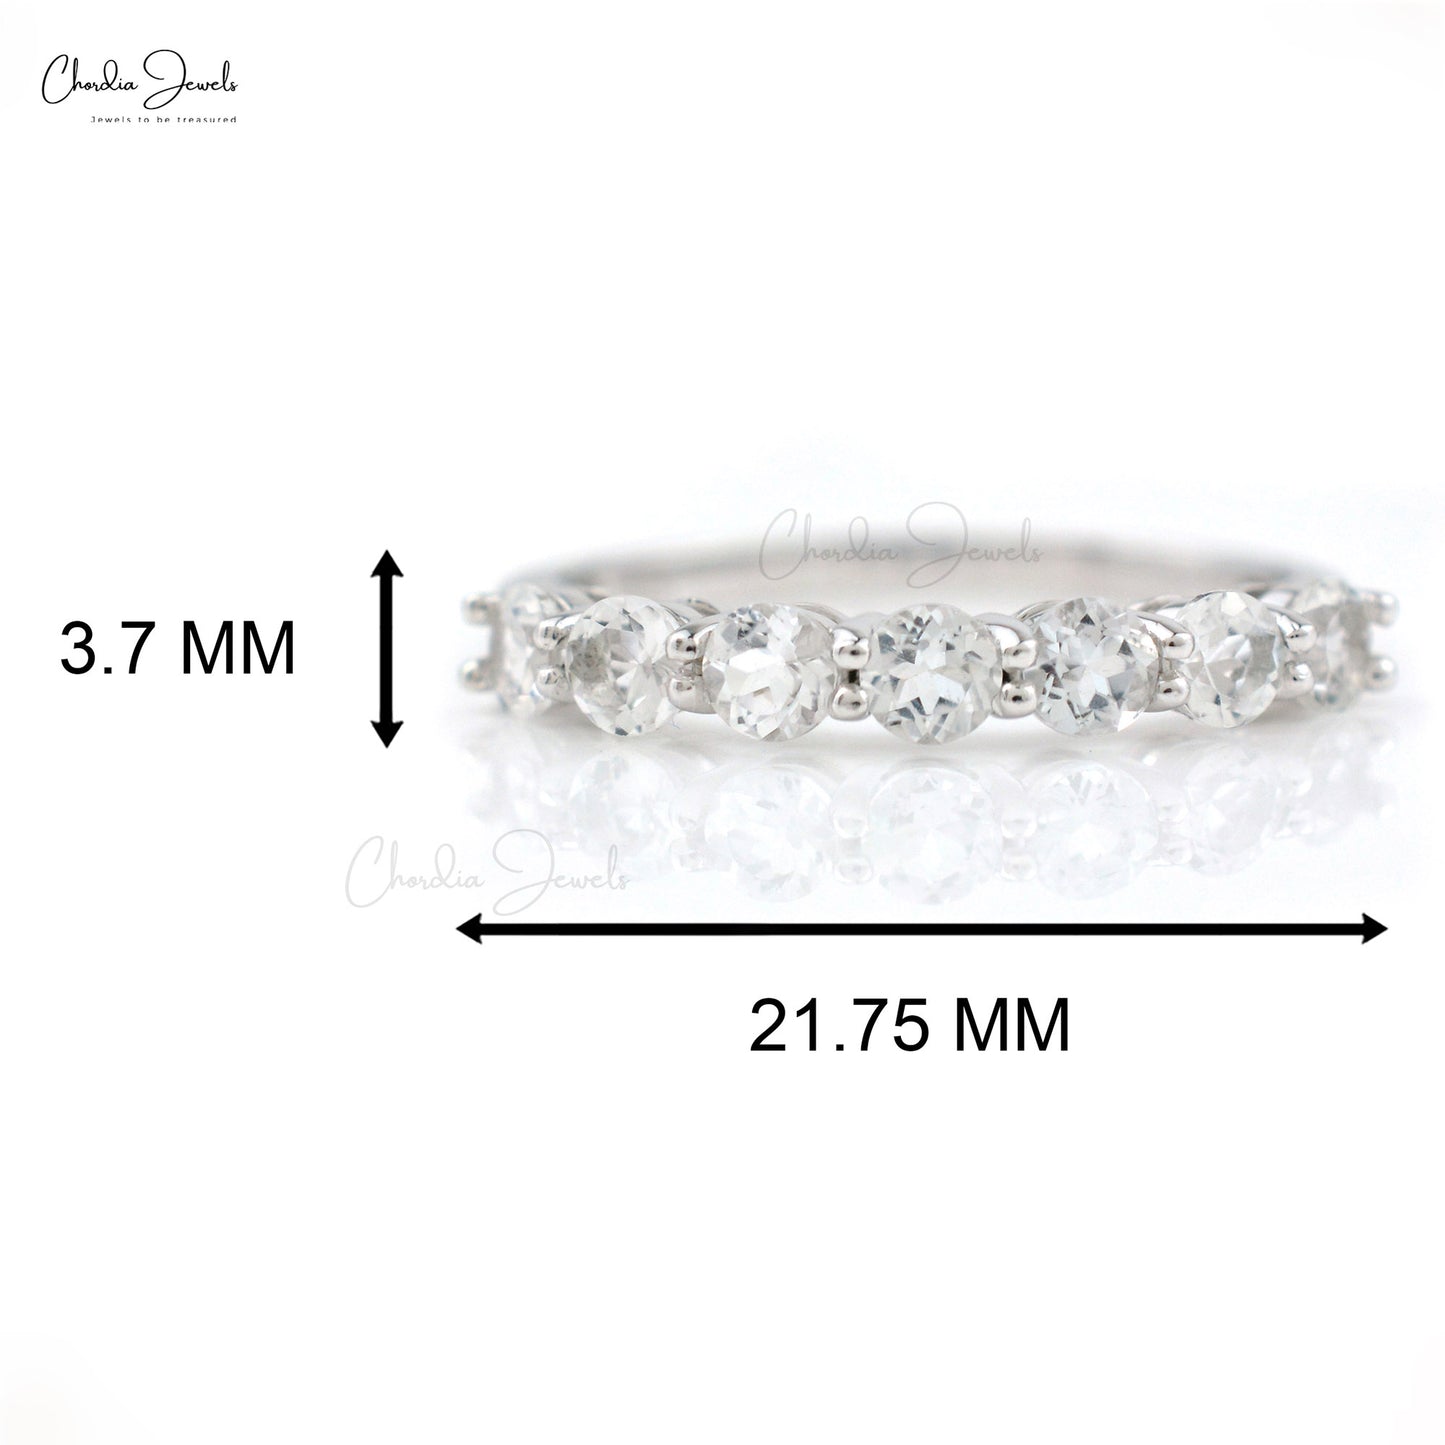 100% Natural White Topaz 925 Sterling Silver Eternity Band For Women Round Cut Gemstone Jewelry For Anniversary Gift